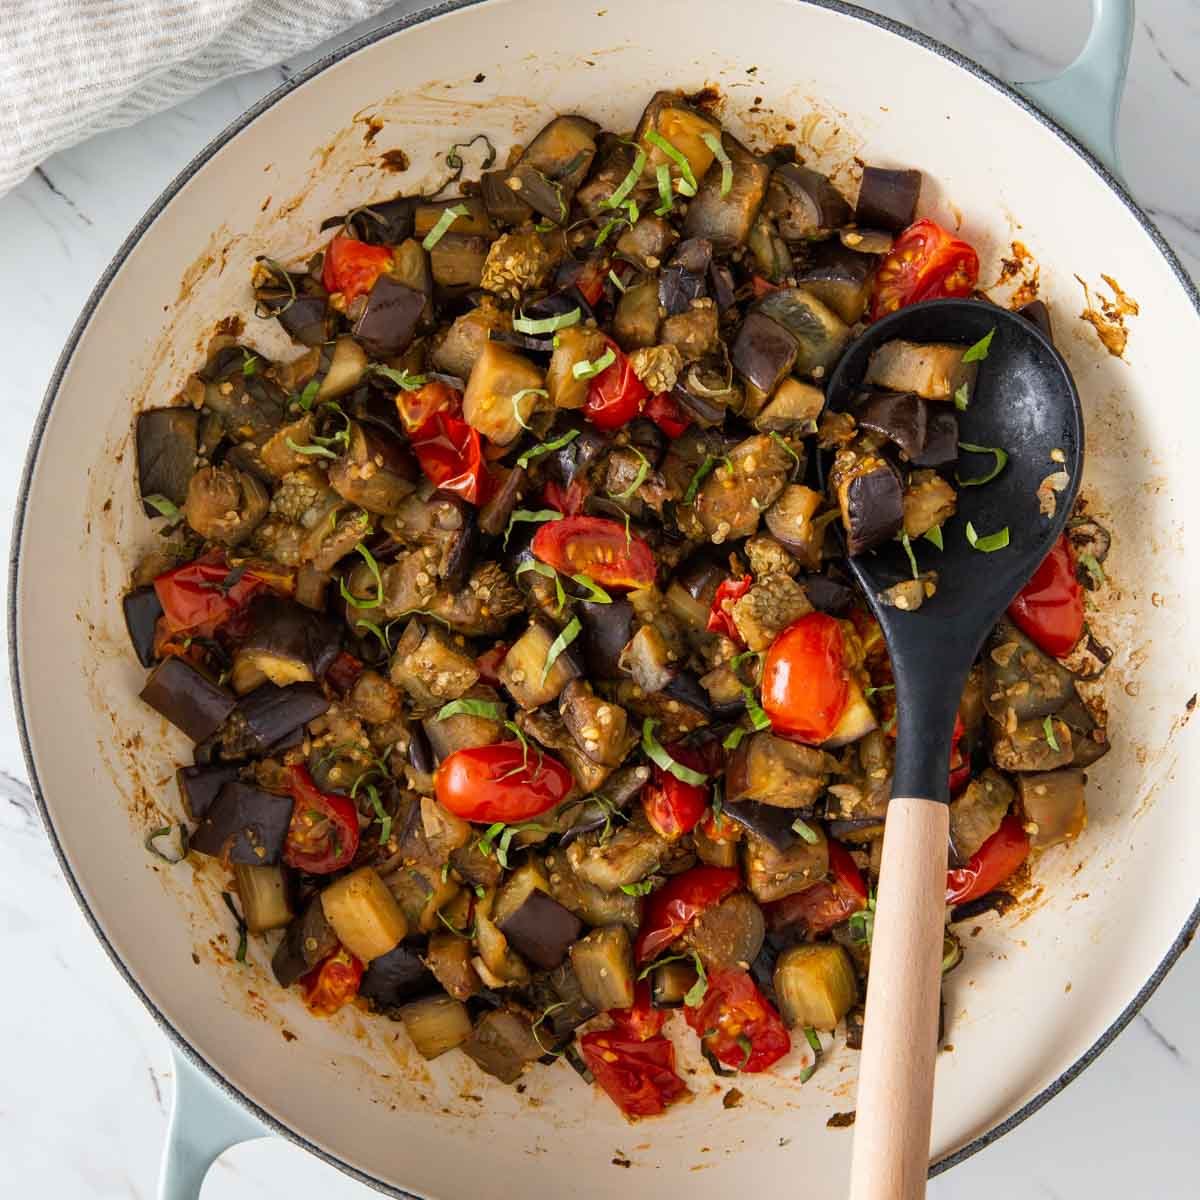 Sauteed eggplant and tomatoes in a large skillet.